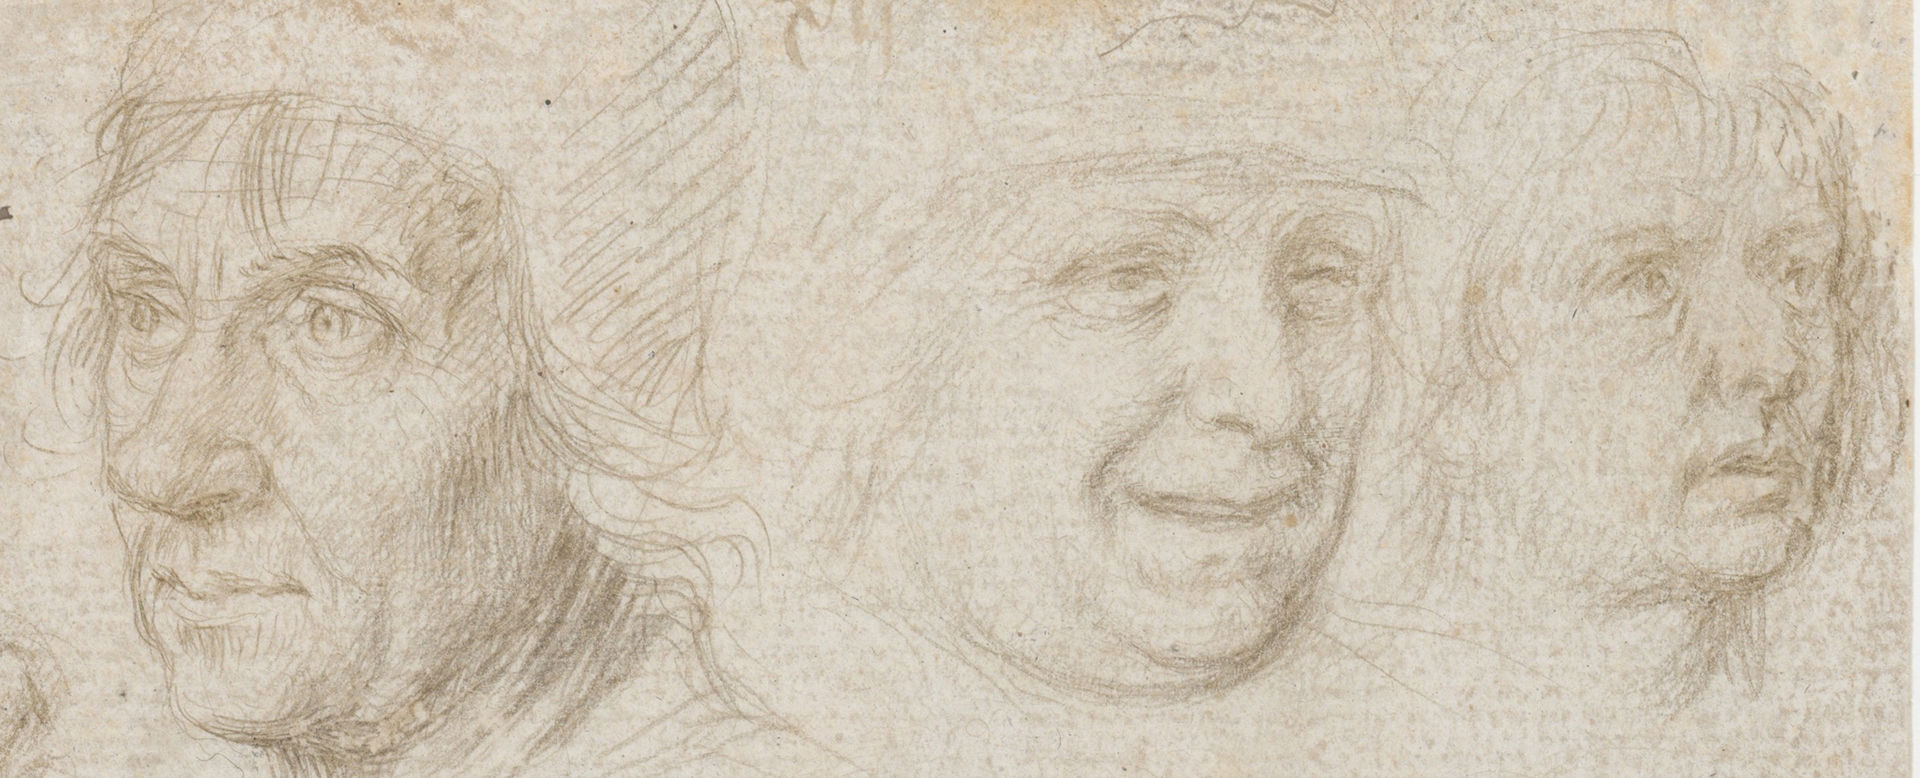 A detailed sketch of the faces of three men in Renaissance caps looking in different directions.